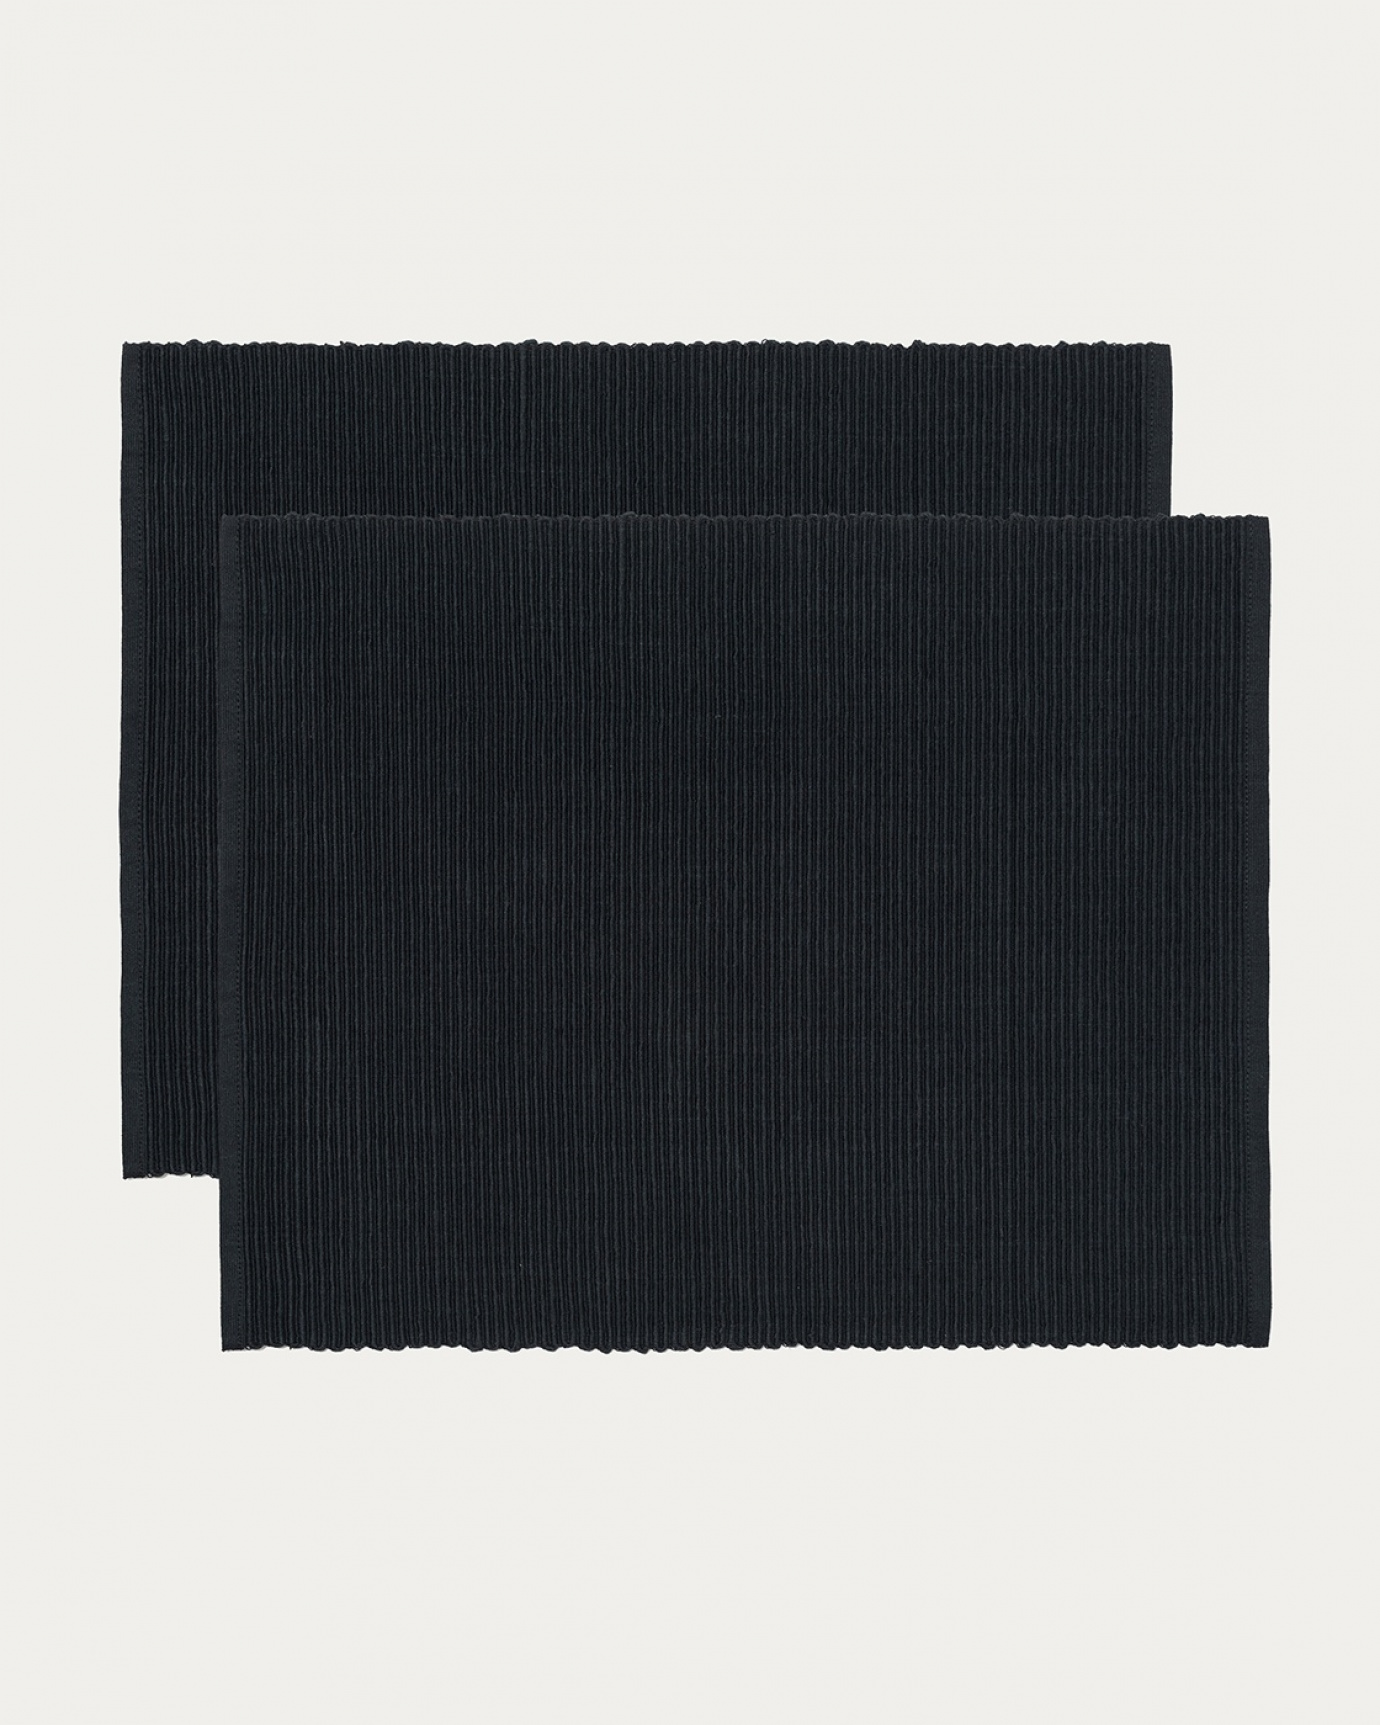 Product image black UNI placemat made of soft cotton in ribbed quality from LINUM DESIGN. Size 35x46 cm and sold in 2-pack.